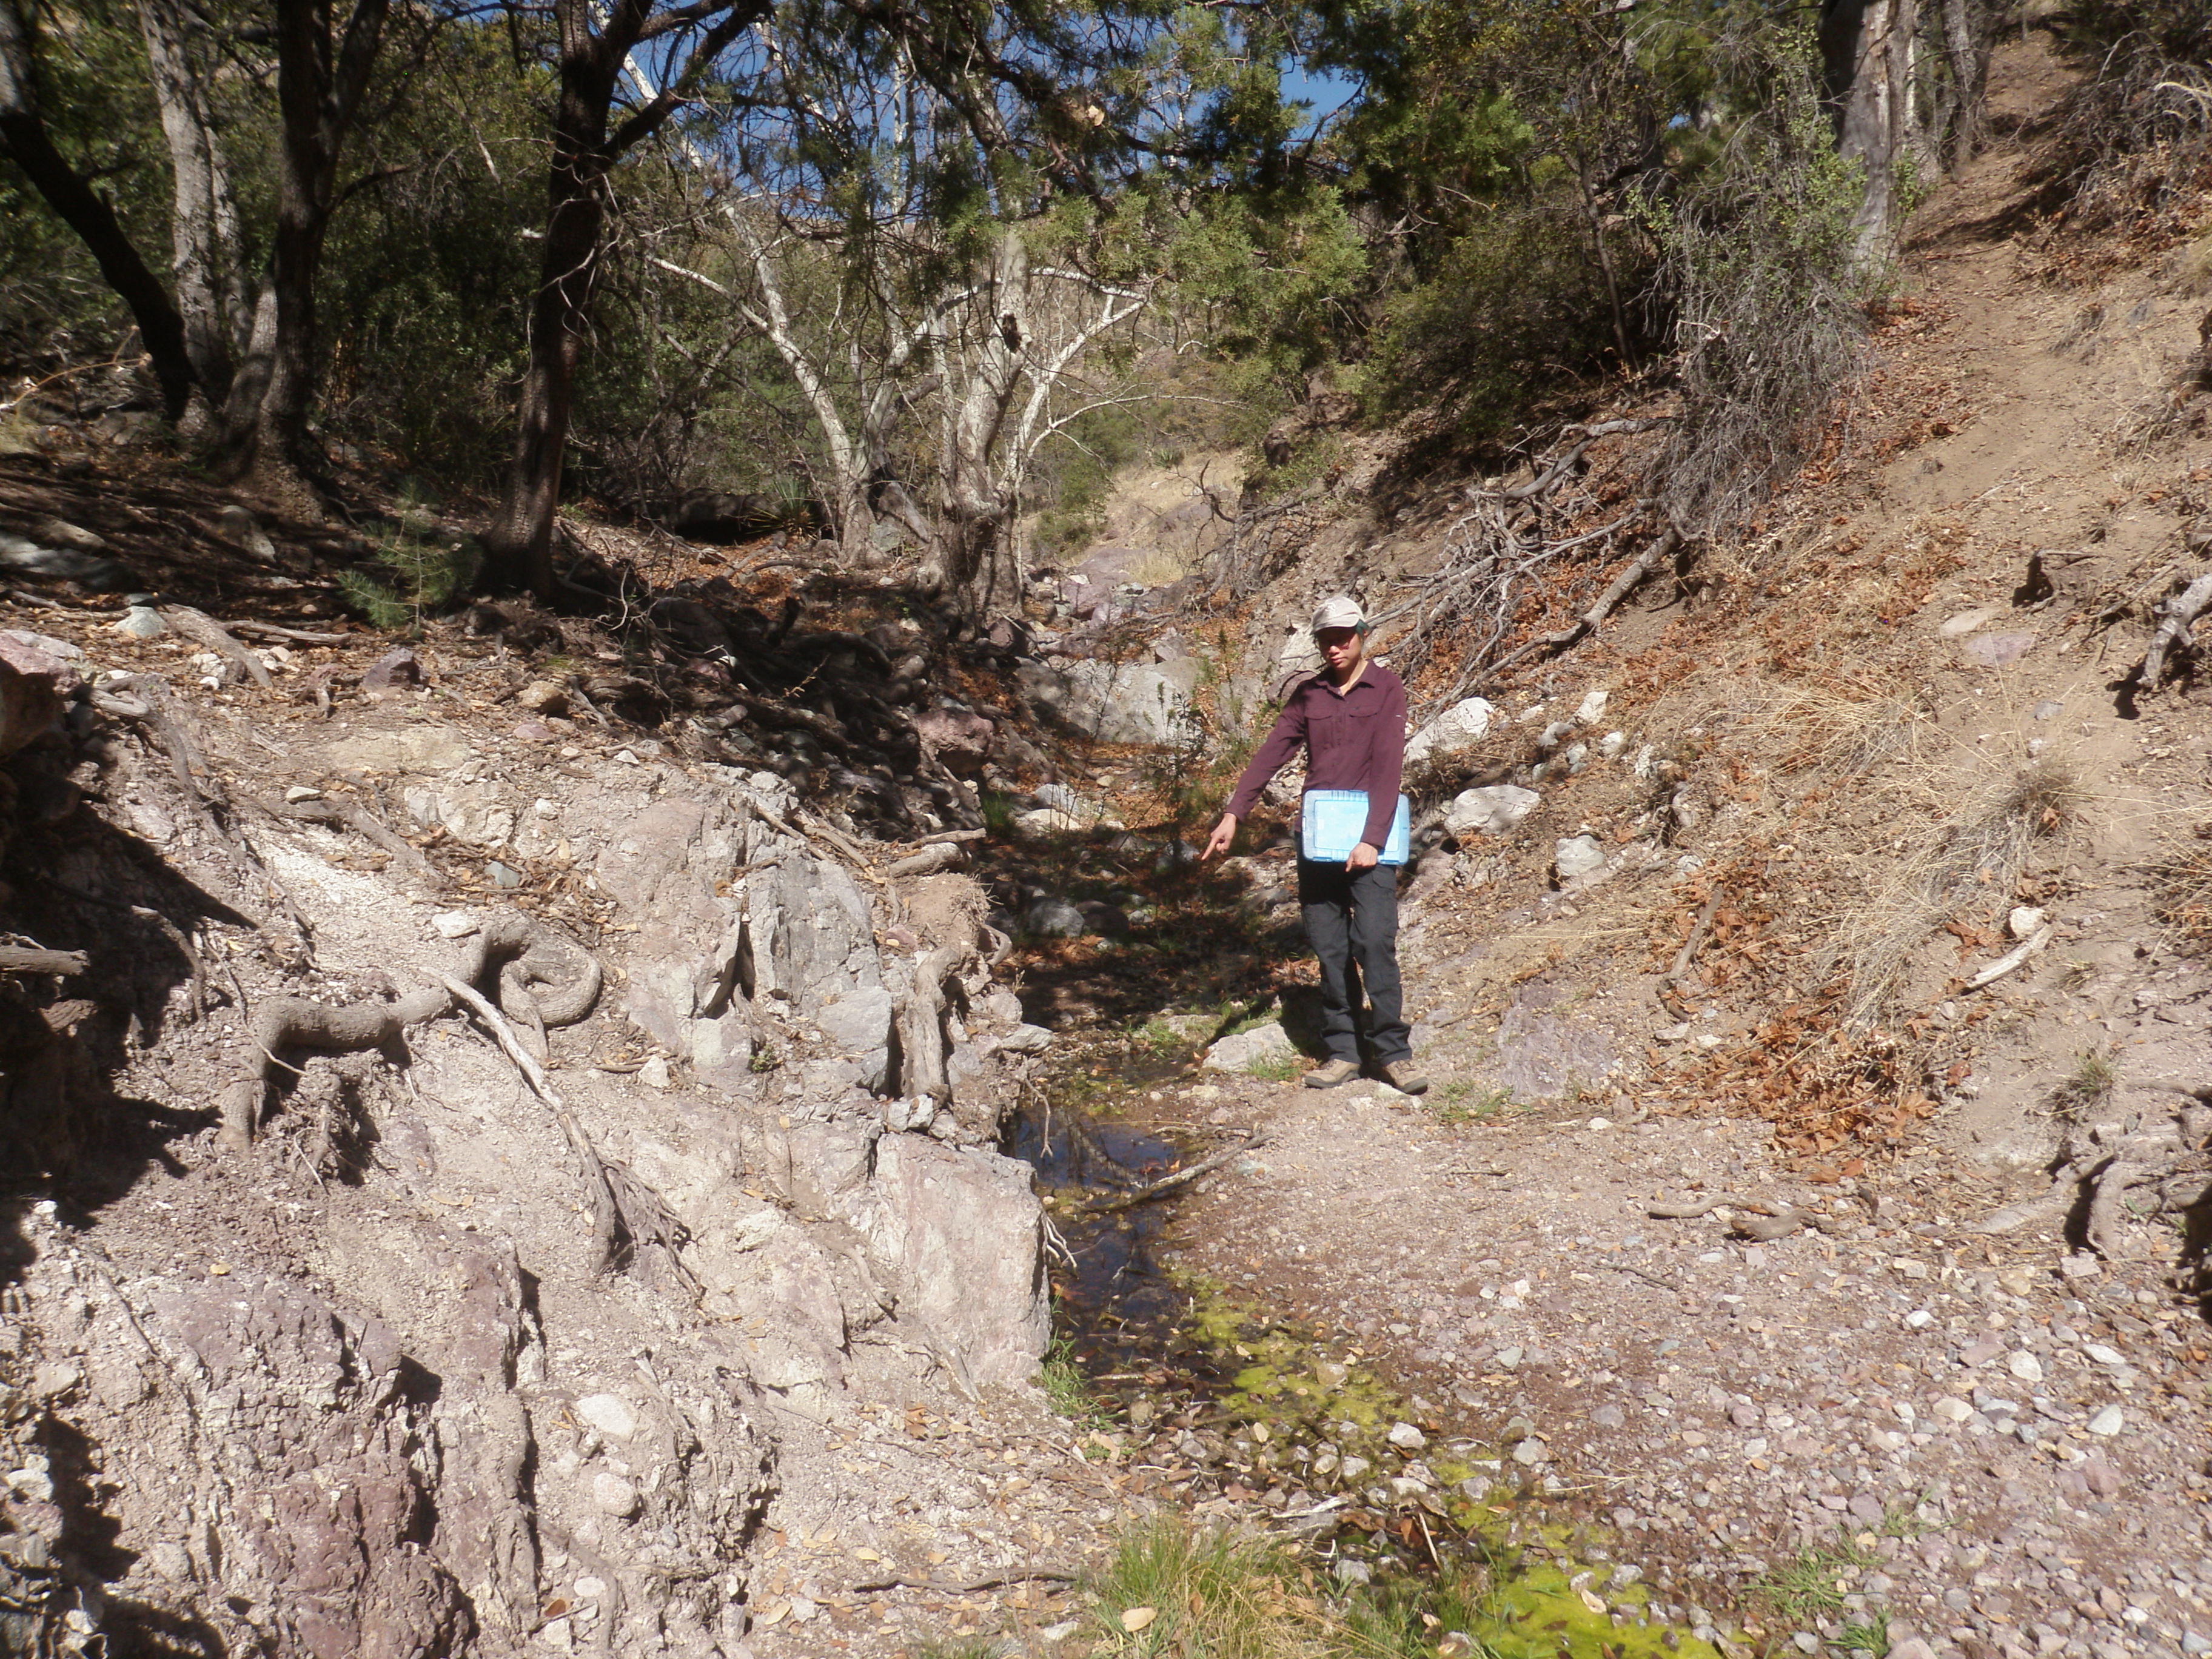 Person stands pointing down at small emergent stream in riparian area.